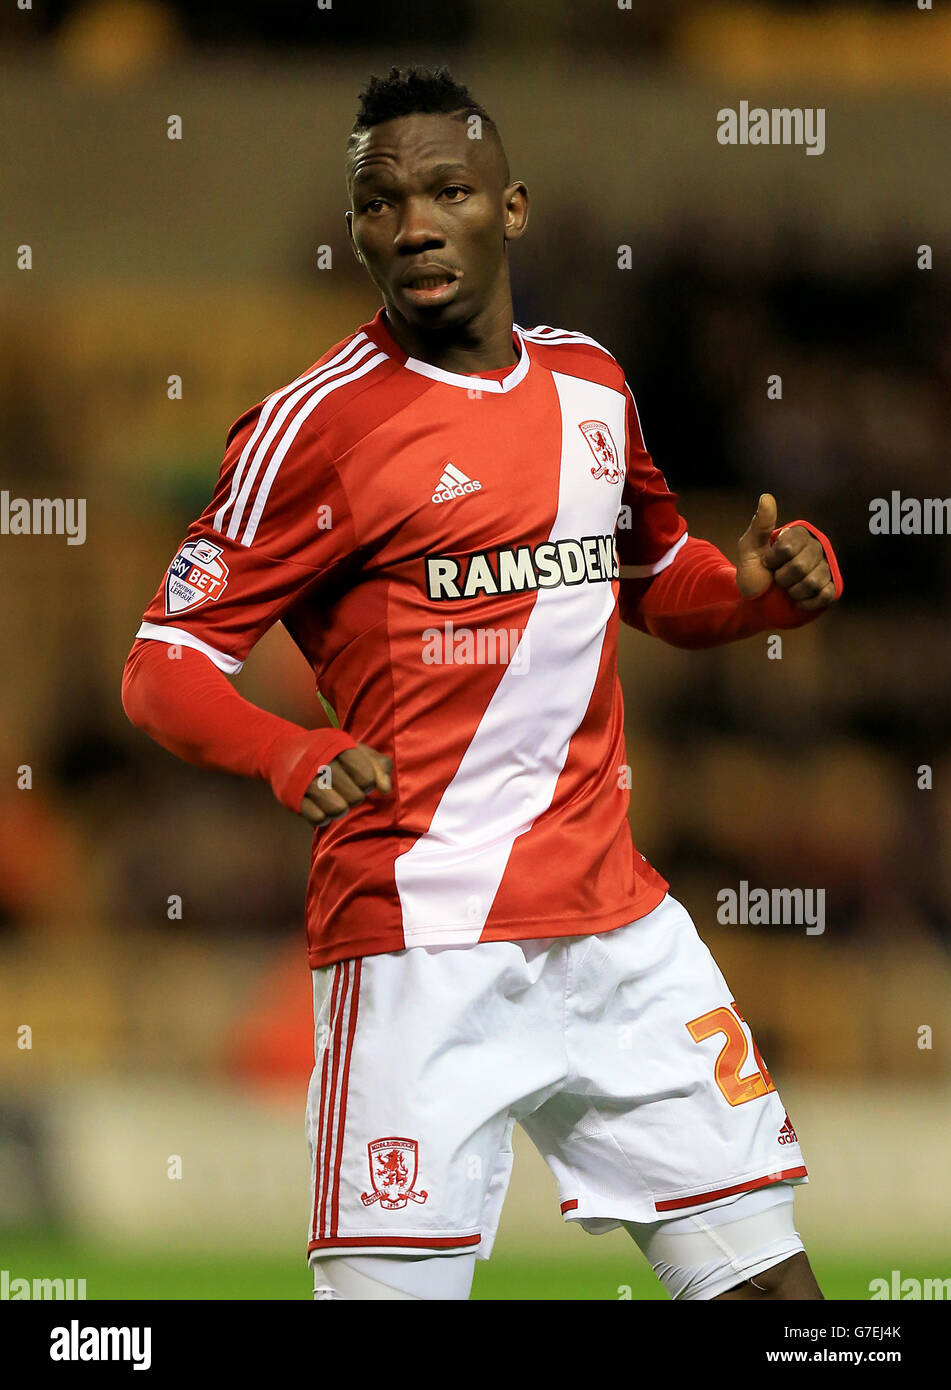 Soccer - Sky Bet Championship - Wolverhampton Wanderers v Middlesbrough - Molineux. Kenneth Omeruo, Middlesborough Stock Photo